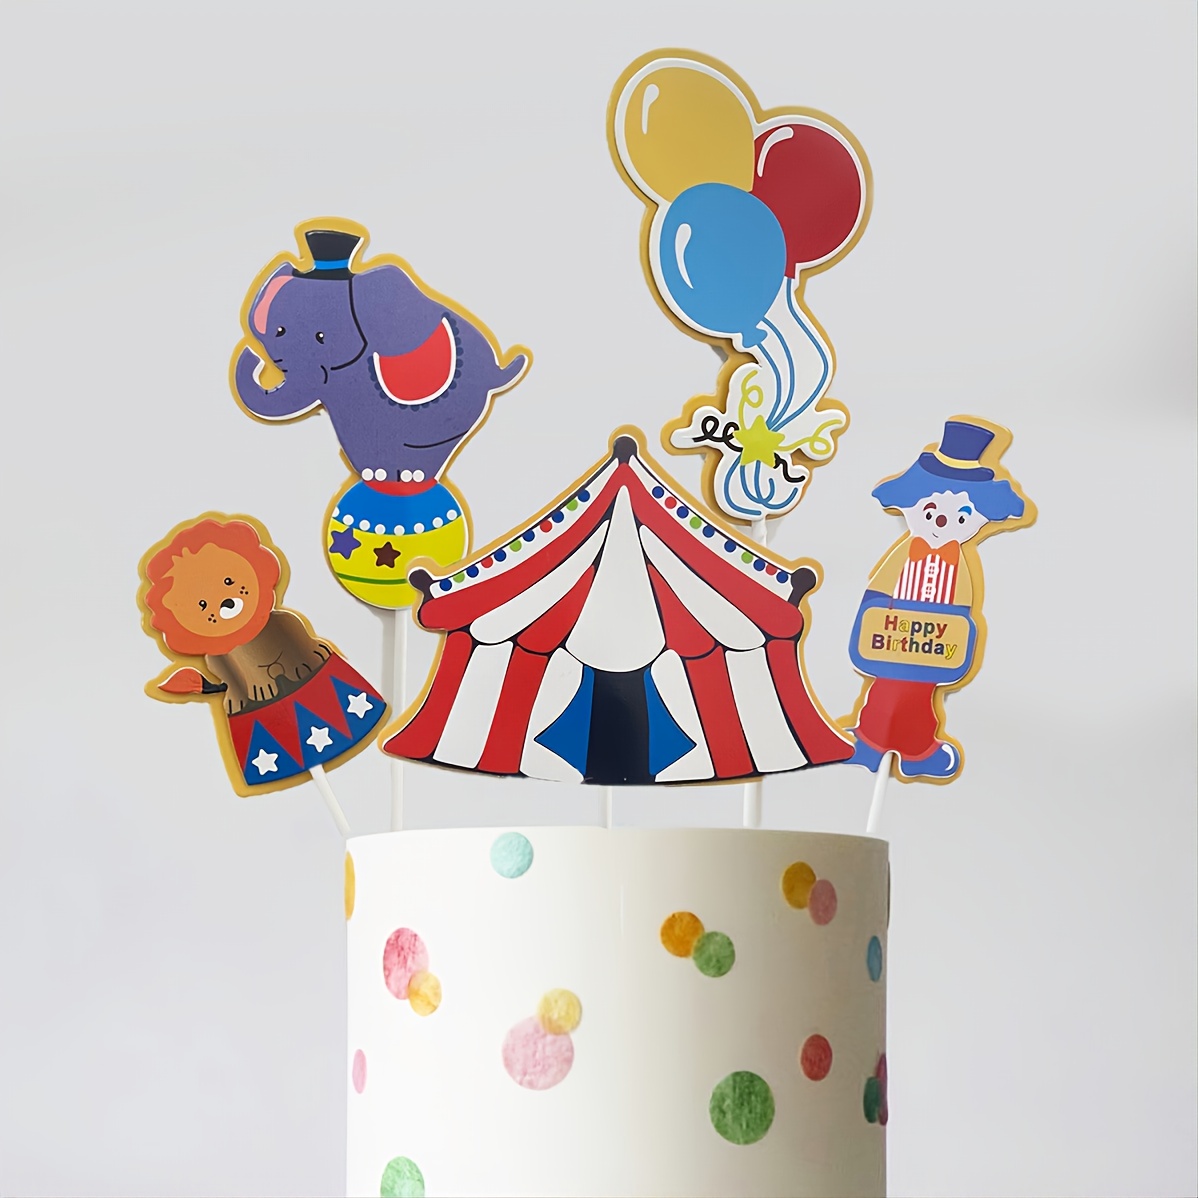 Clown And 1 Cupcake Toppers To Go With A Circus Theme Cake For My Grandsons  First Birthday Thank You For Looking - CakeCentral.com